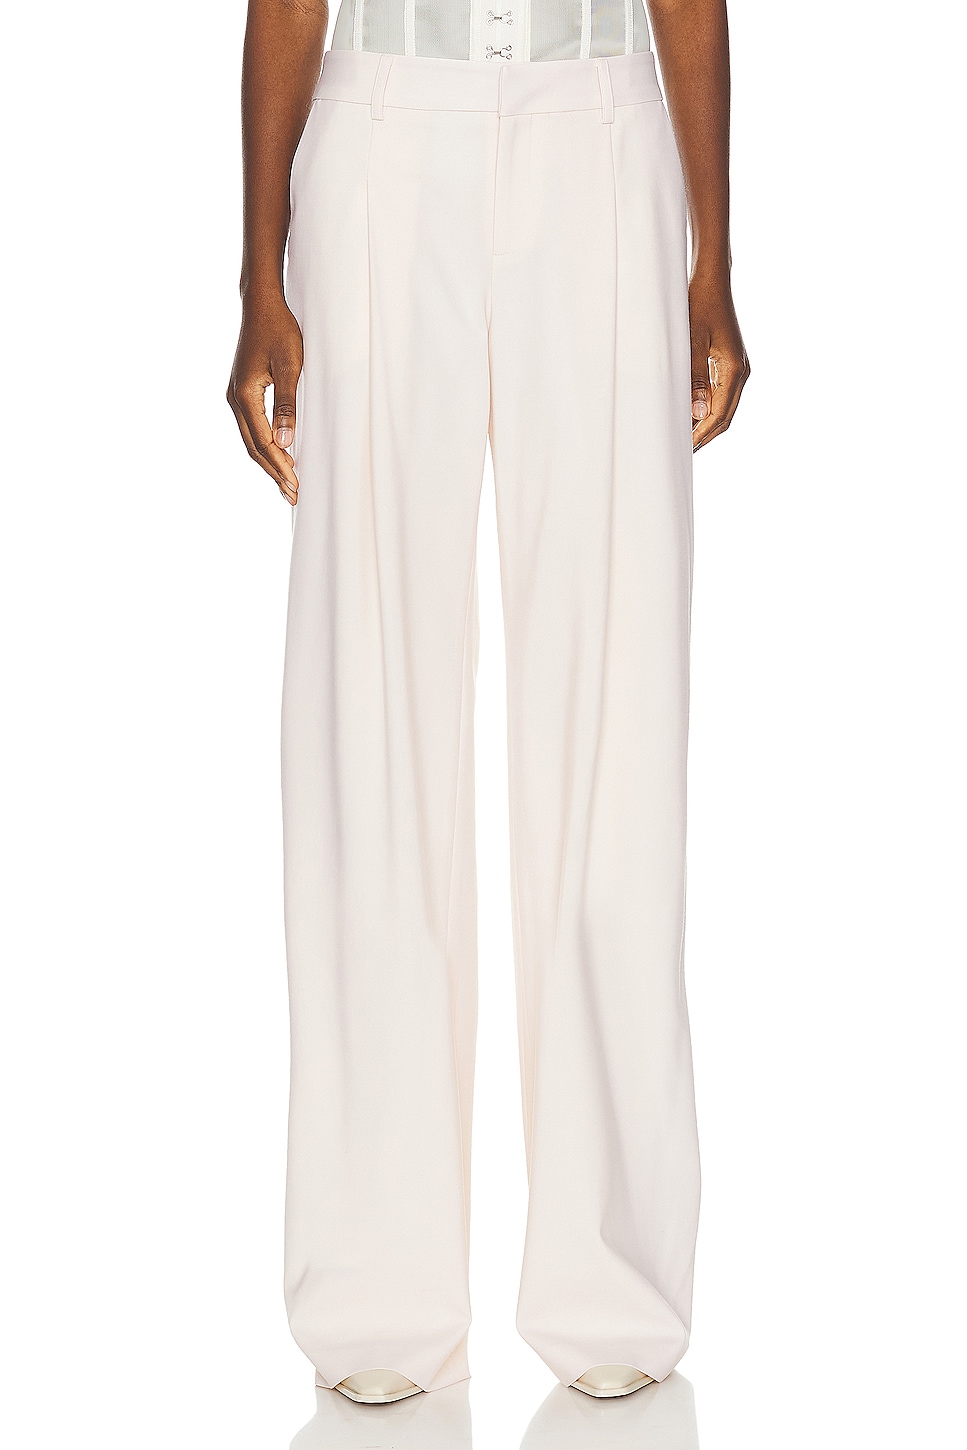 Image 1 of Monse Mesh Bustier Trouser in Ivory